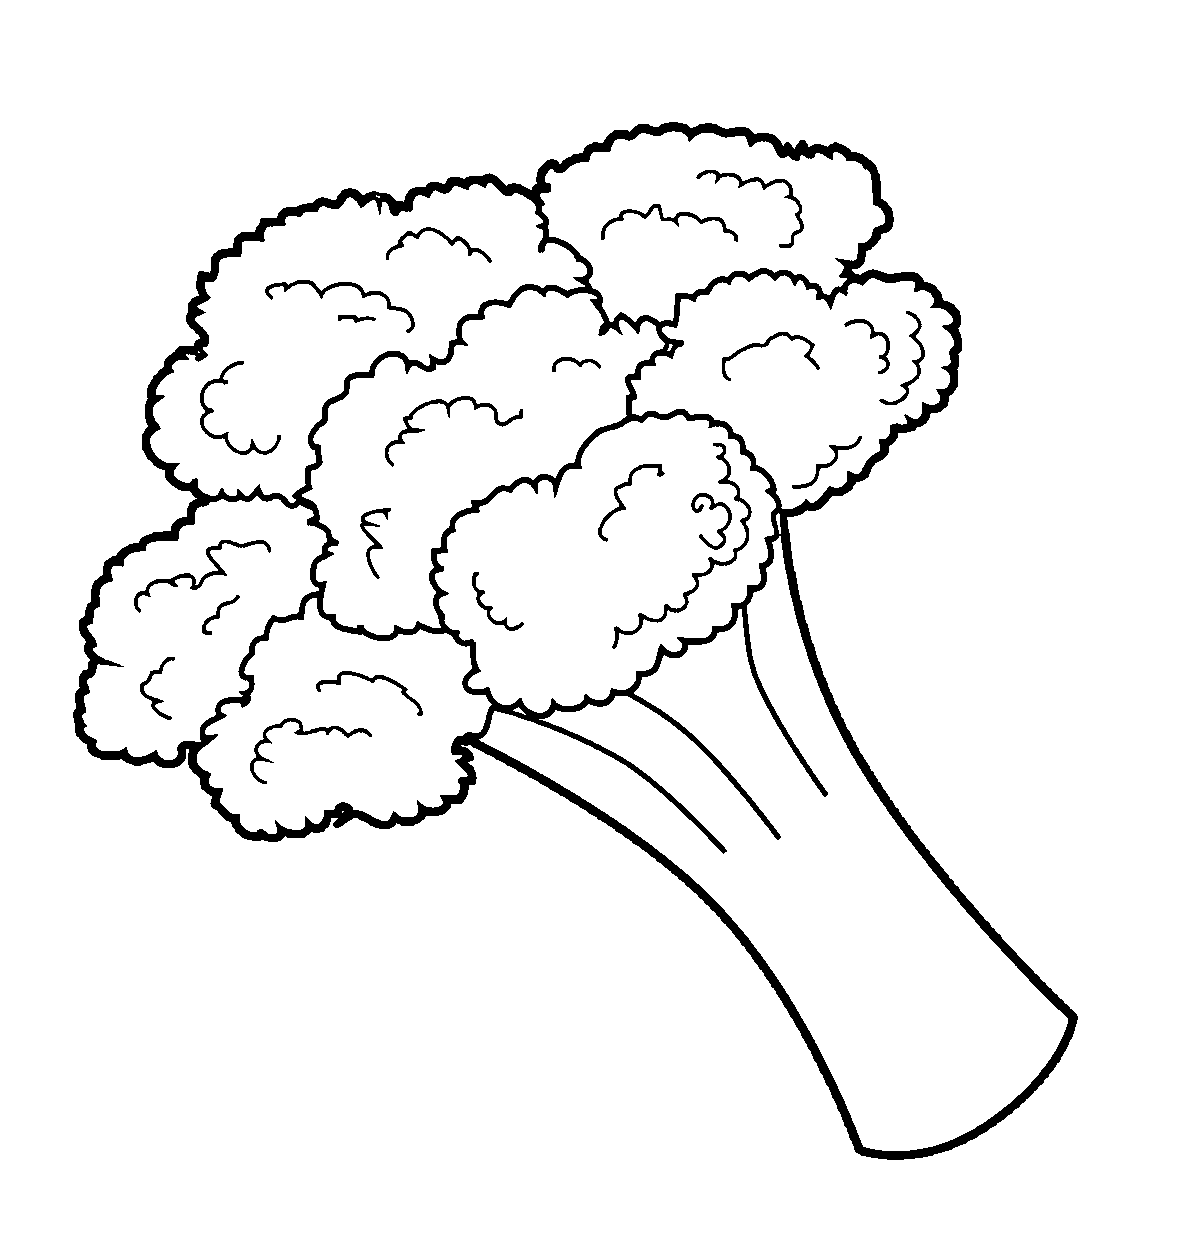 Broccoli Stalk Coloring Pages